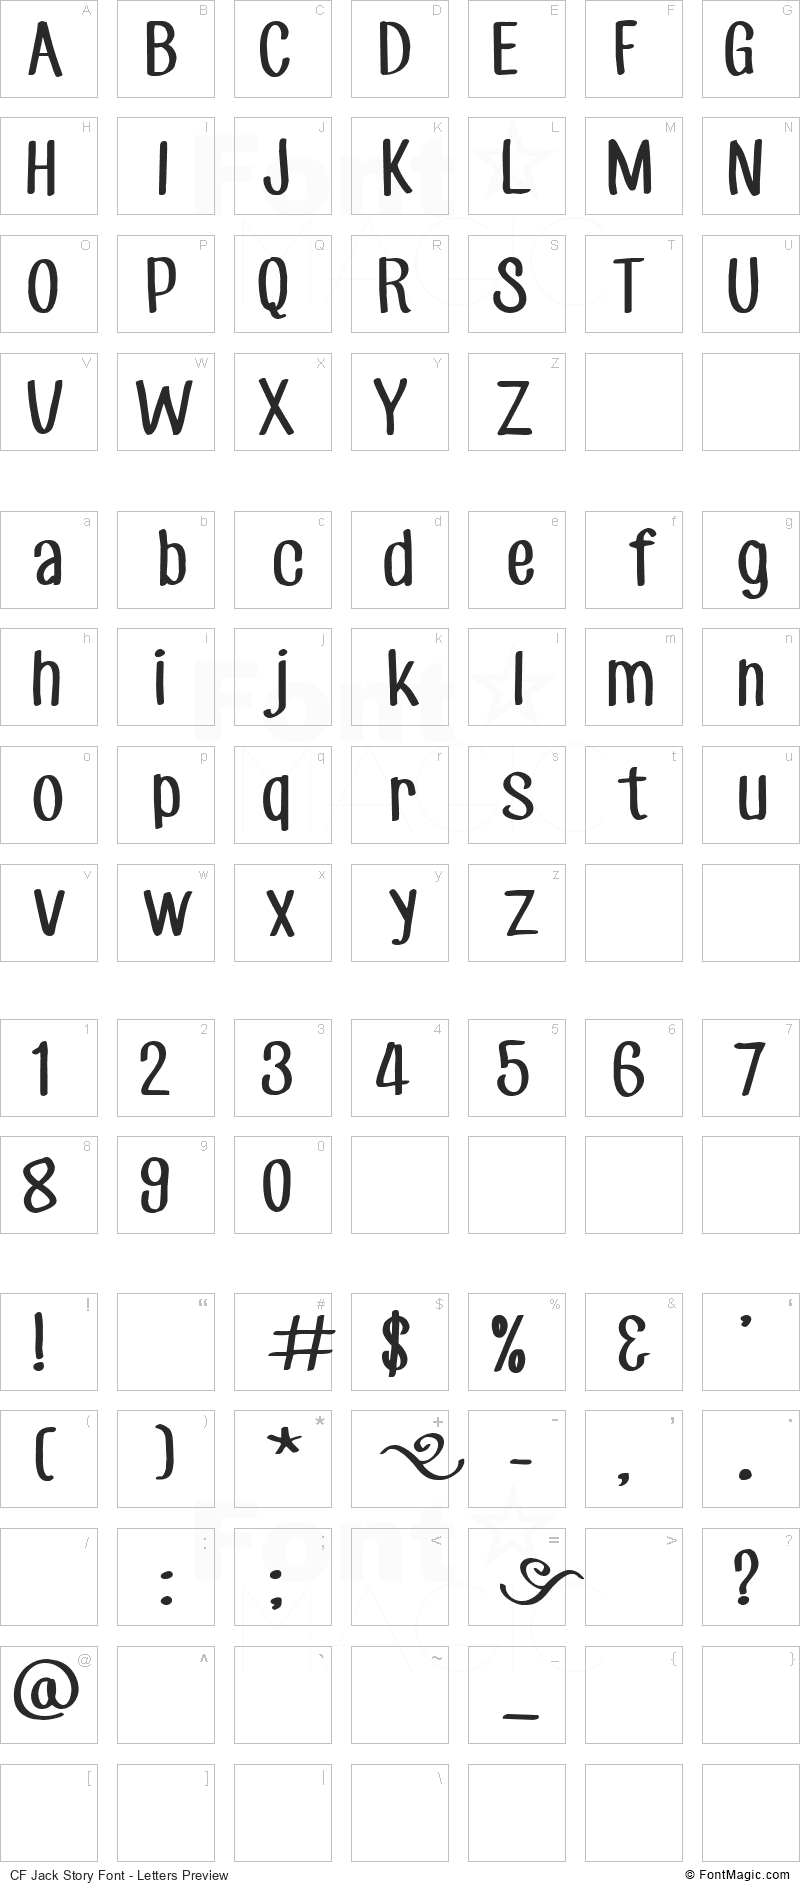 CF Jack Story Font - All Latters Preview Chart